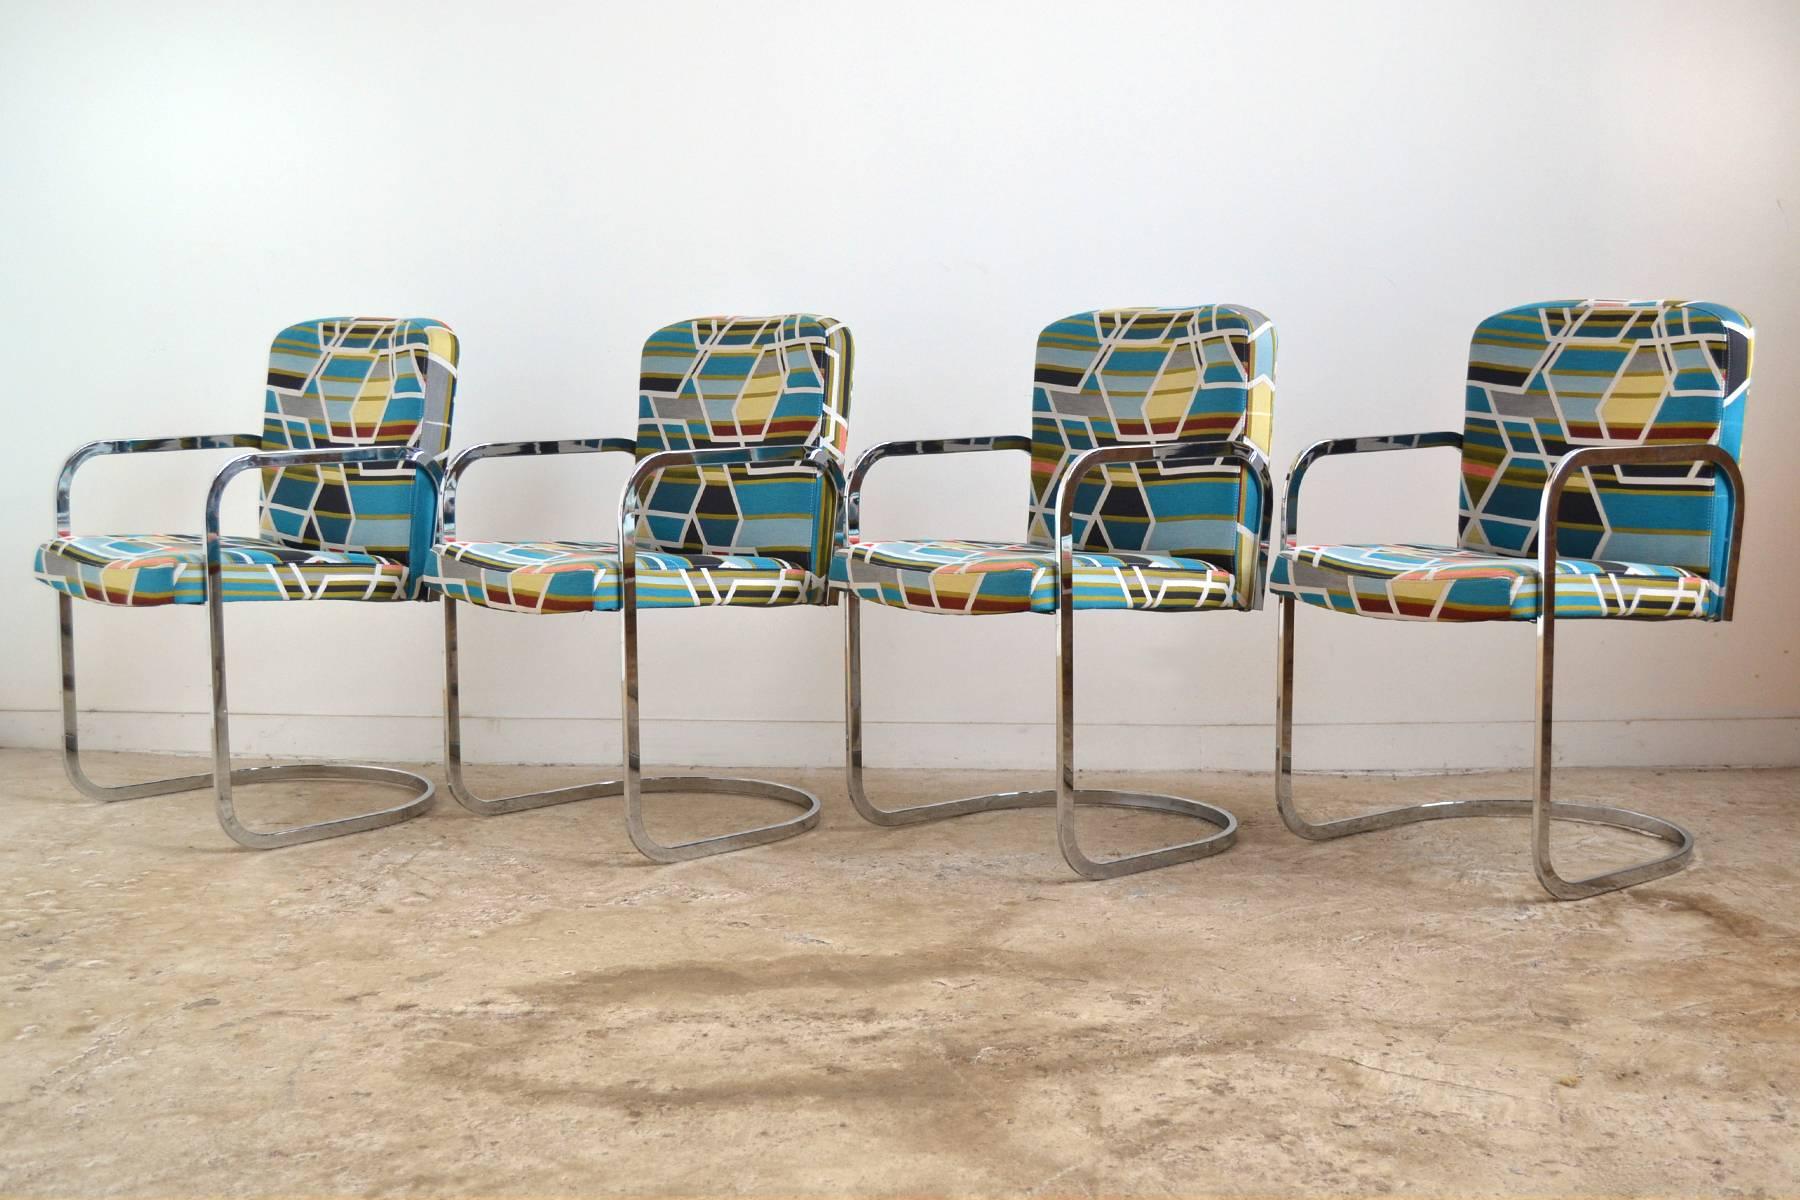 This set of armchairs by D.I.A. clearly take inspiration from Mies van der Rohe's Brno chairs. The chairs have chrome steel frames which support seats newly upholstered in Maraham fabric 